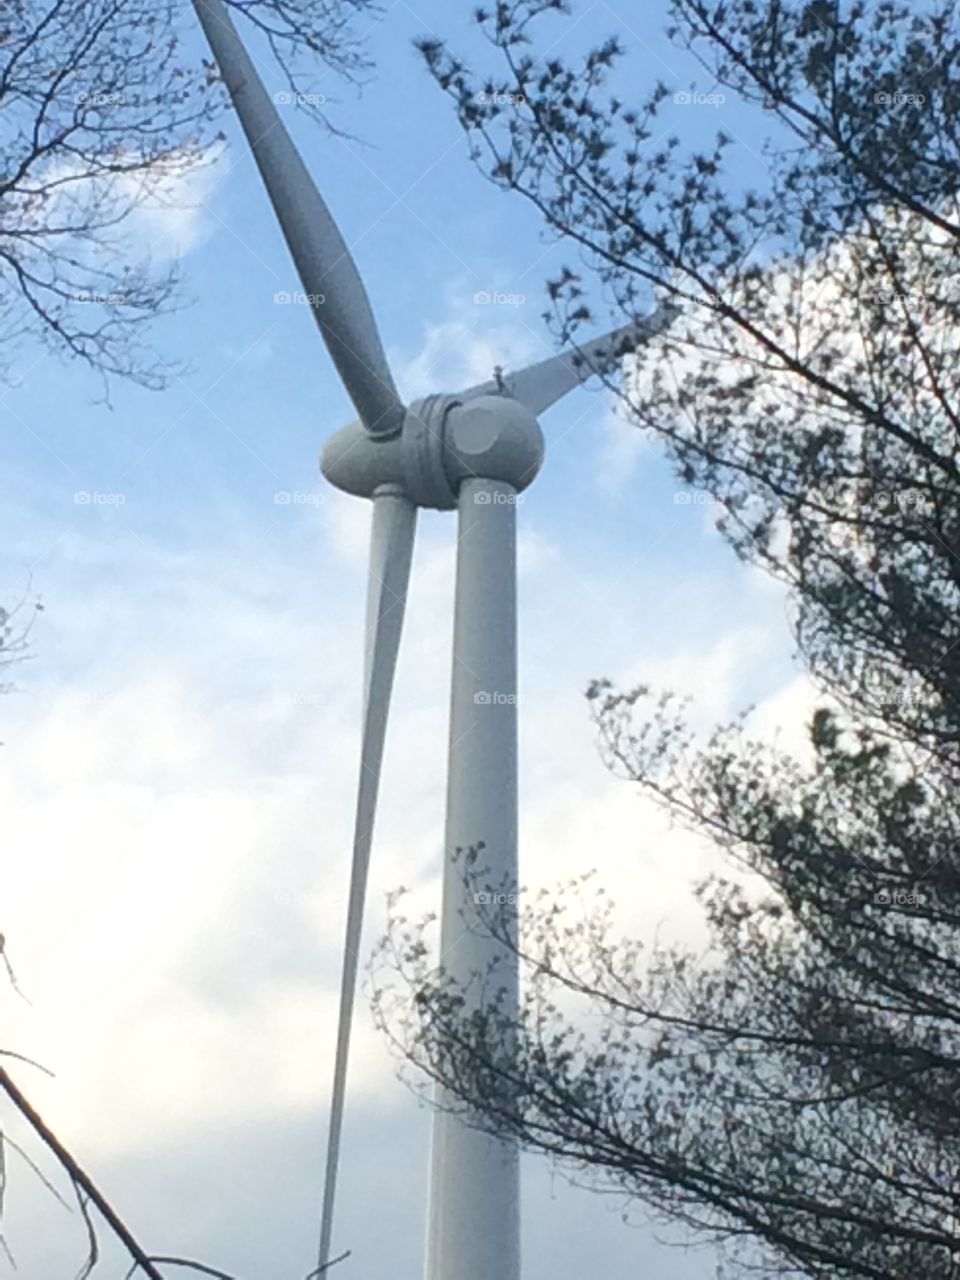 These turbines were absolutely riveting. I got soo much exercise going to see these in Greene RI. Worth a trip and the walk. 